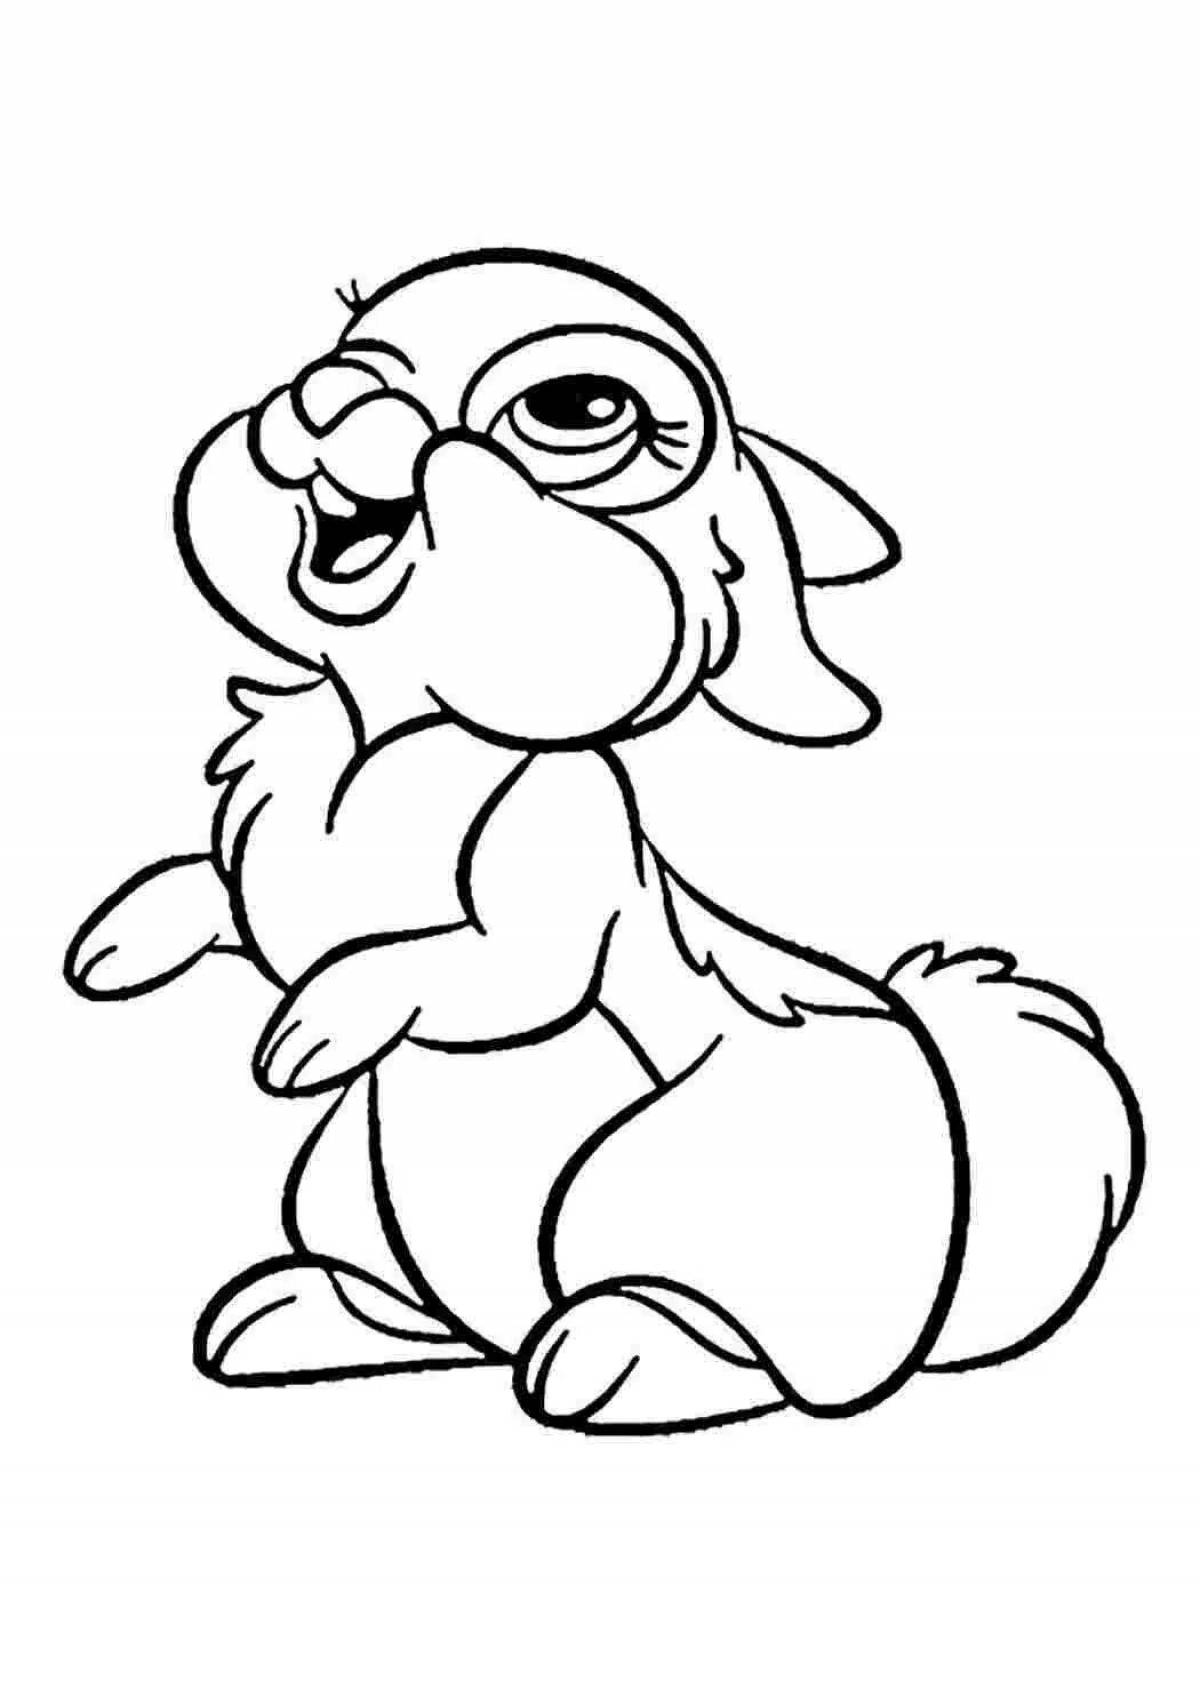 Cute fluffy bunny coloring book